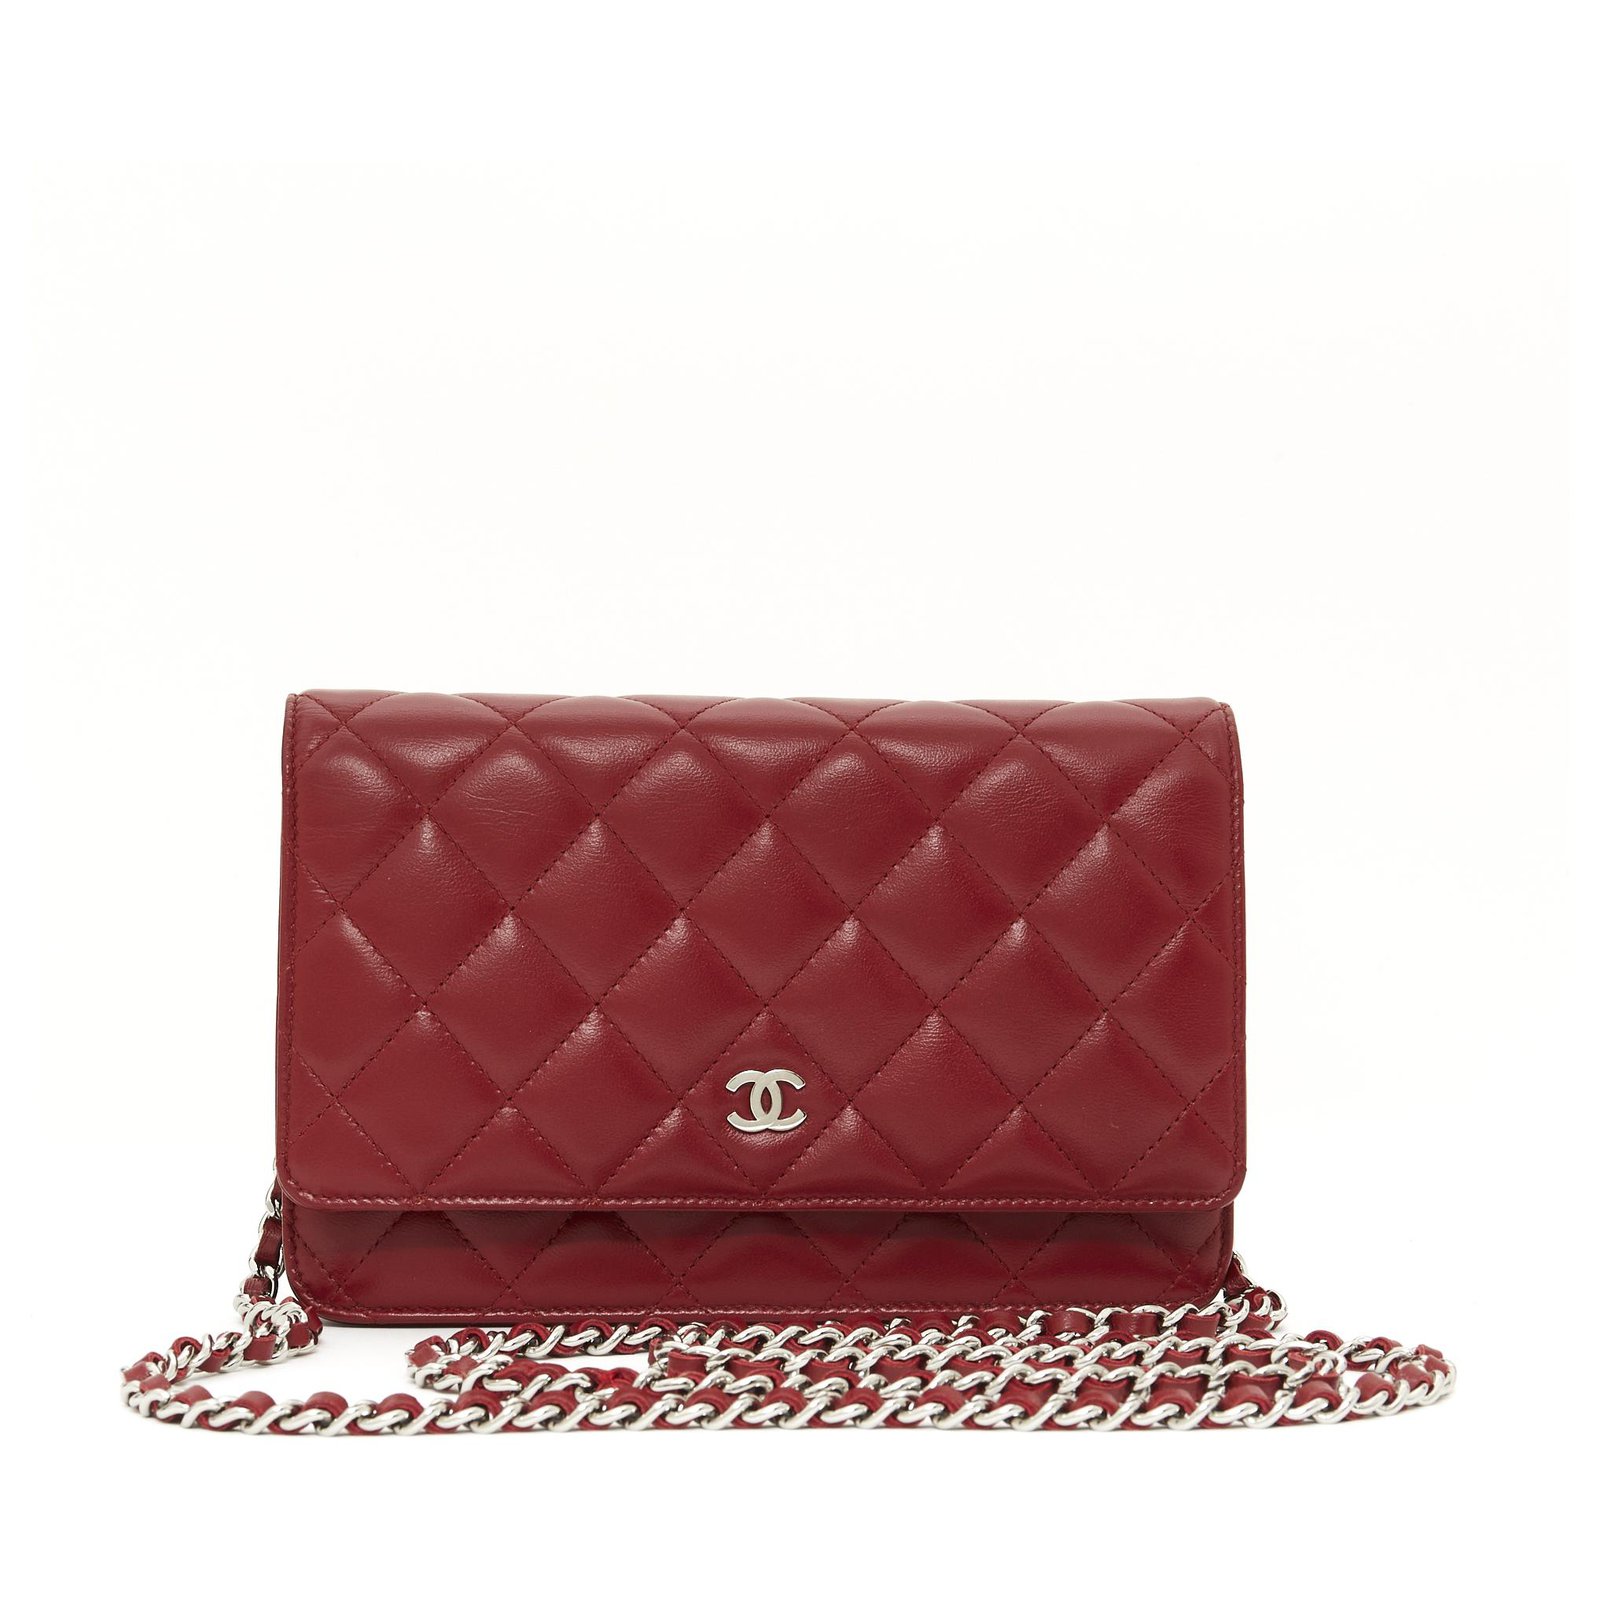 Chanel WALLET ON CHAIN WOC RED SILVER Silver hardware Leather